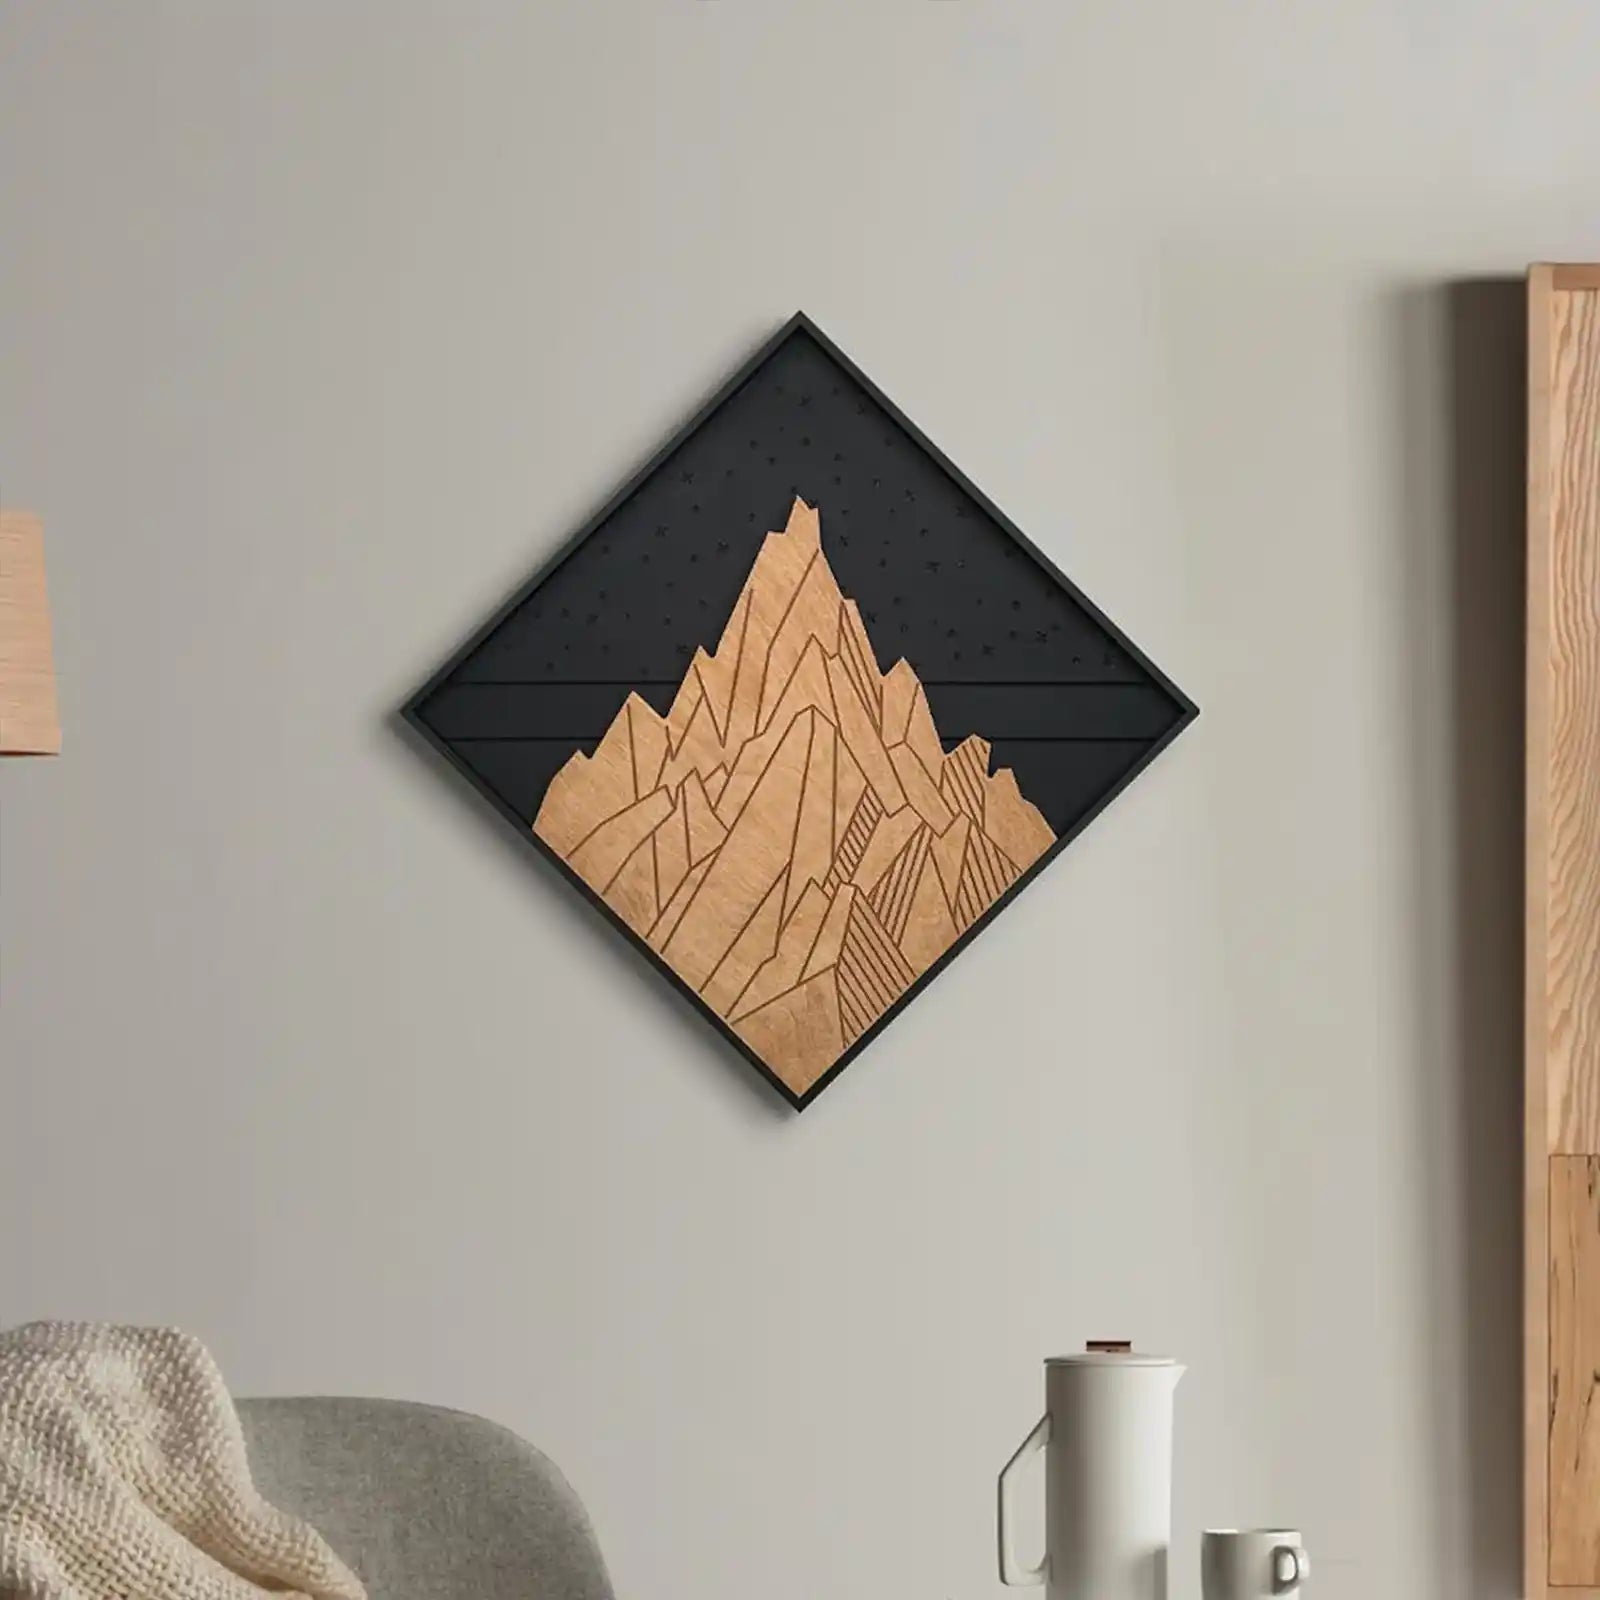 Mountain Wall Decor, Modern 3d Wood Wall Art, Rustic Wood Wall Art, Wood Wall Hanging, Housewarming Gift, Dicounted Product, Gift